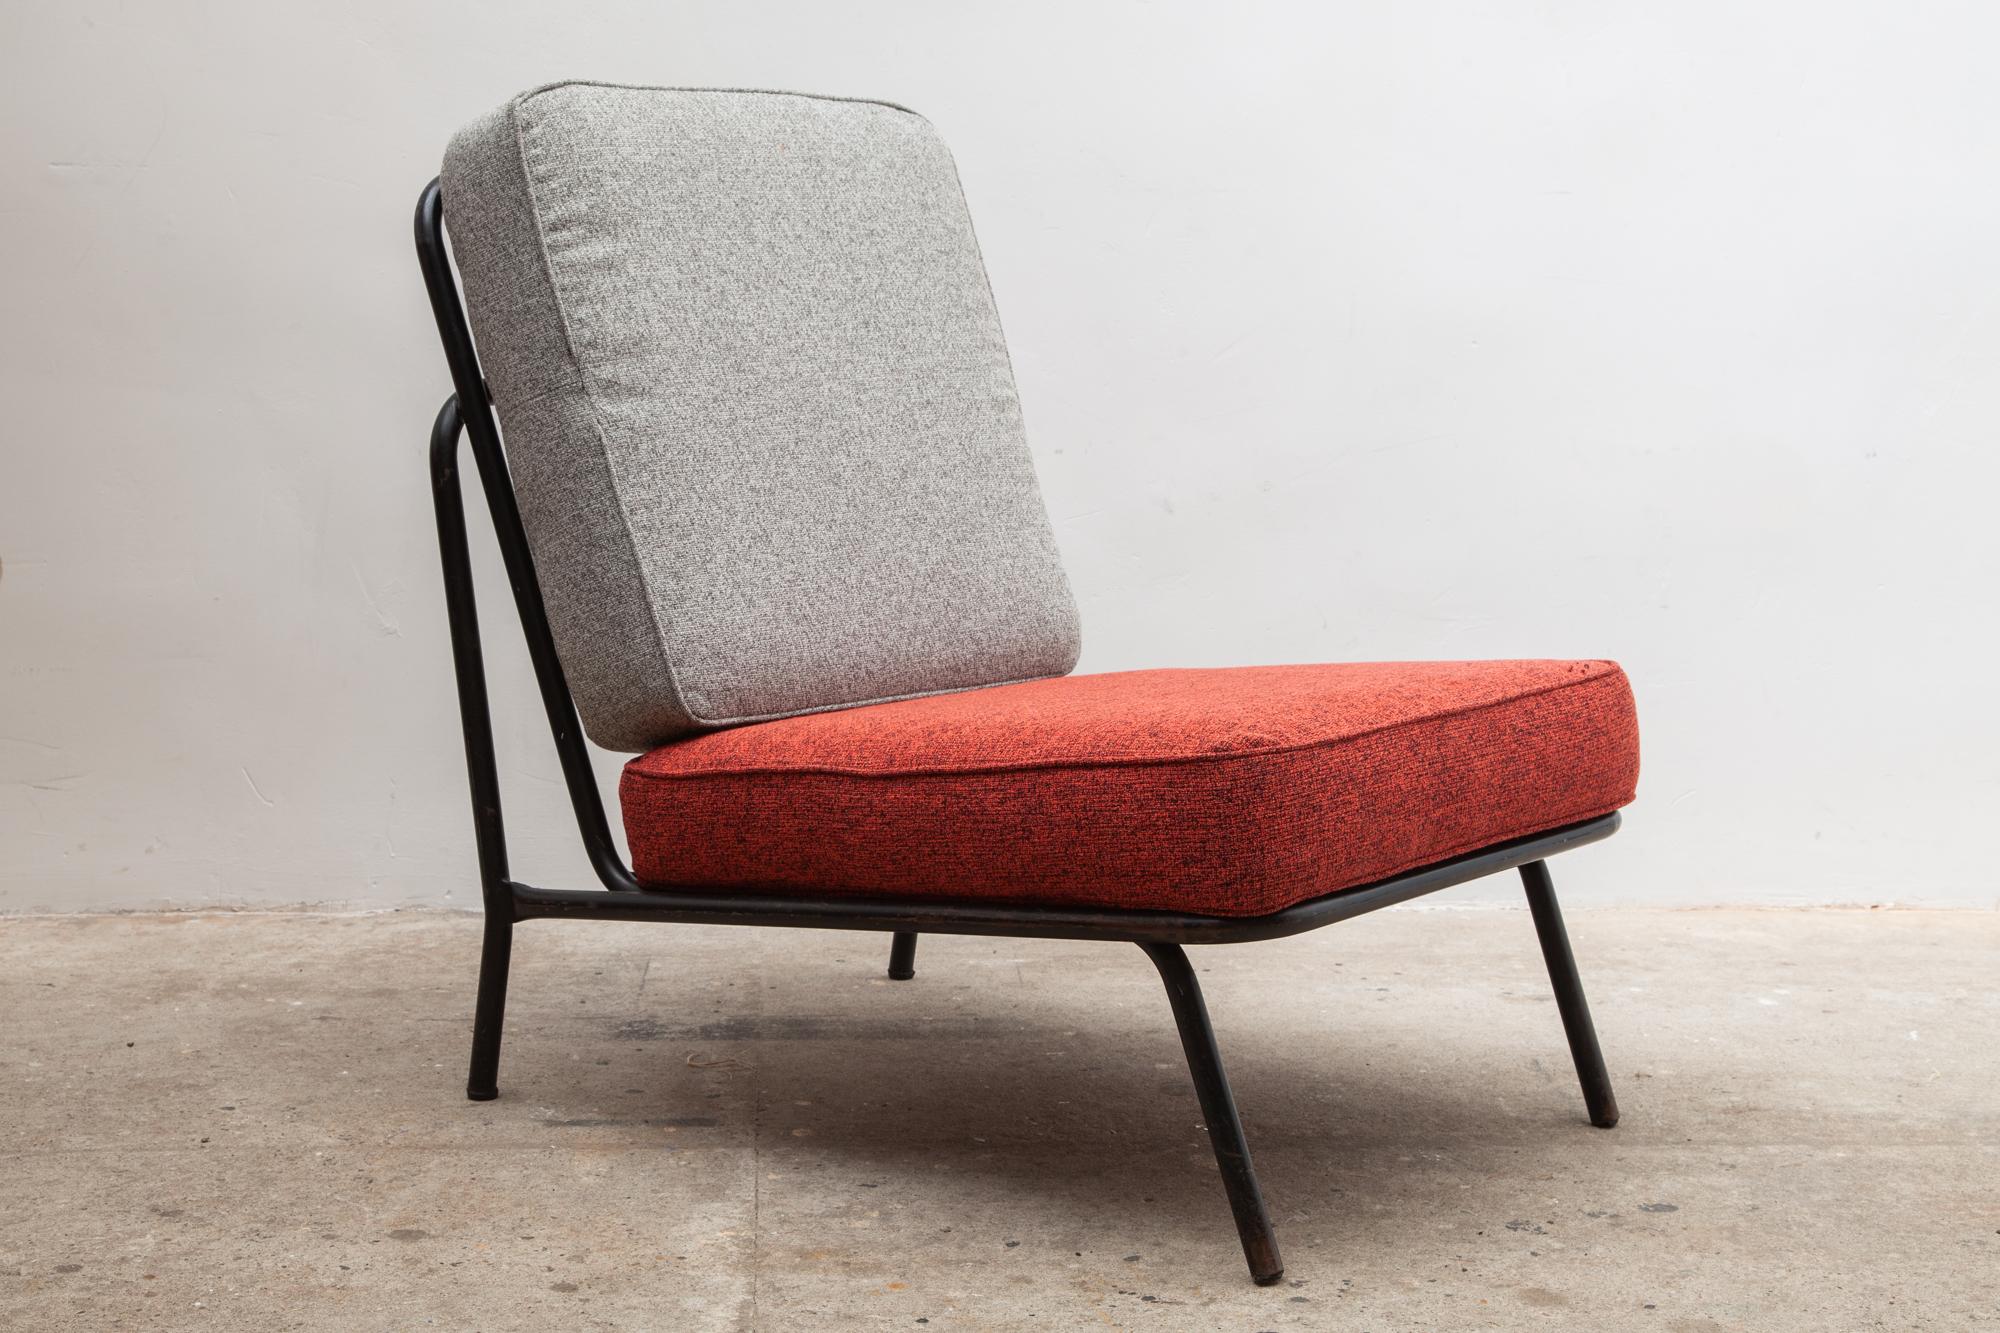 Unknown prototype lounge chair designed in style by Willy Van Der Meeren, Tubax Belgium Design 1960s.
Black metal tube frames with springs. Contrasting red and grey cushions, perfect for a terrace or patio and indoor.
Measures: 53 W x 72 H x 72